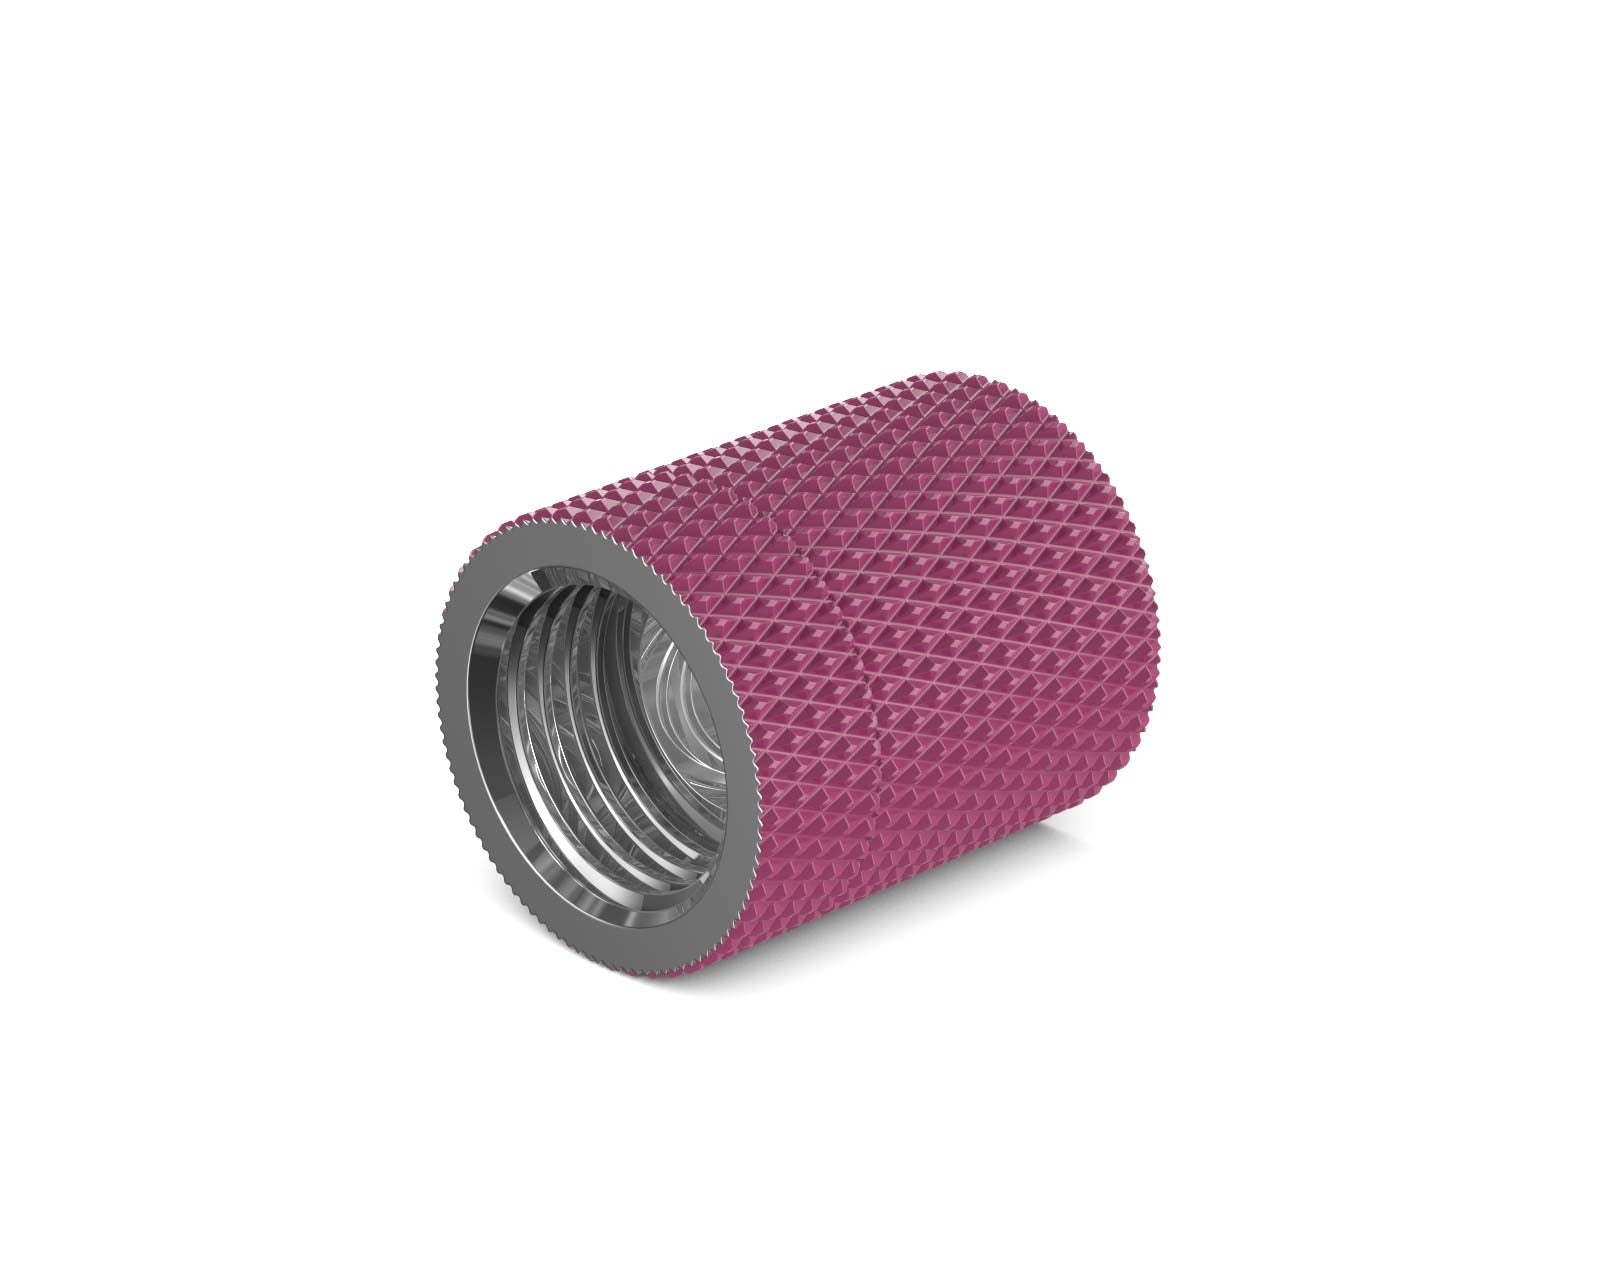 PrimoChill Dual Female G1/4 SX Rotary Extension Coupler - Magenta